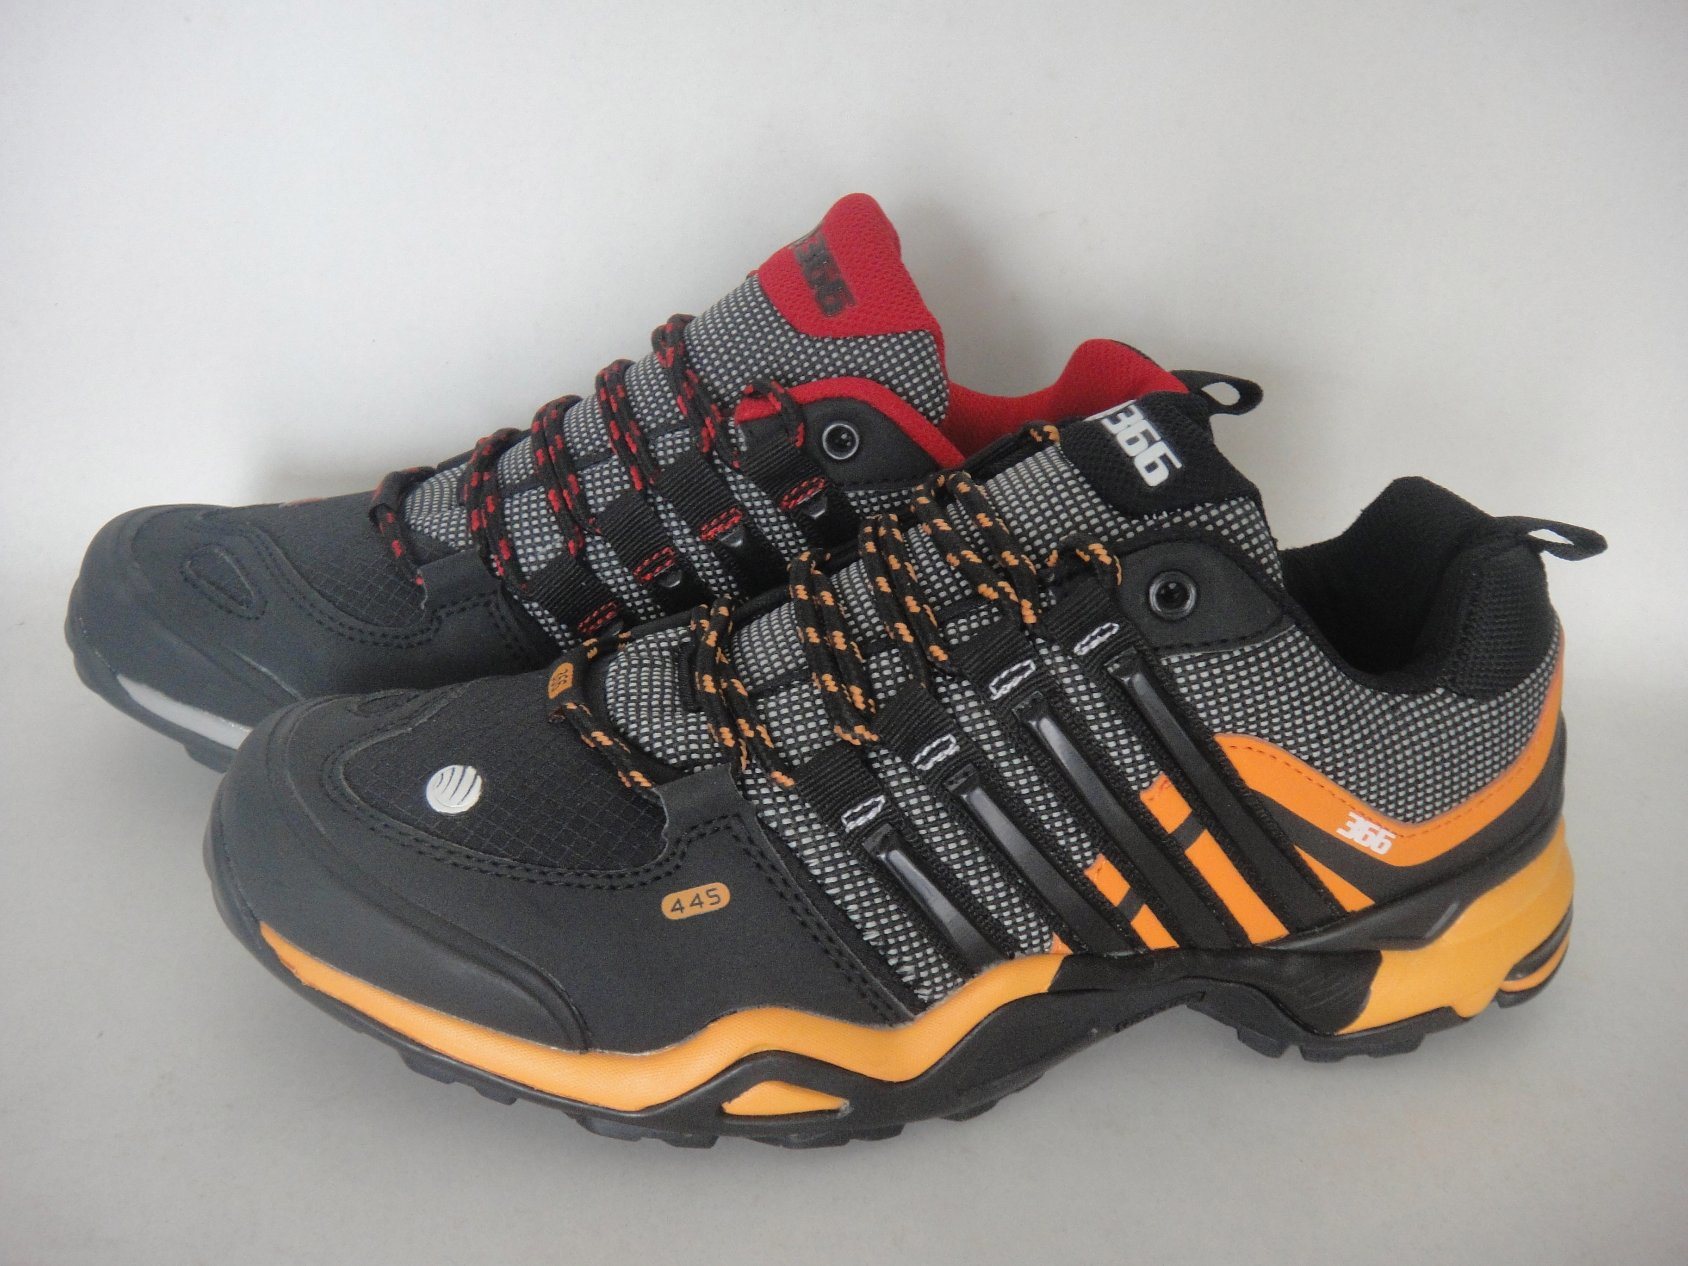 Professional Outdoor Climbing Styles Working Boots